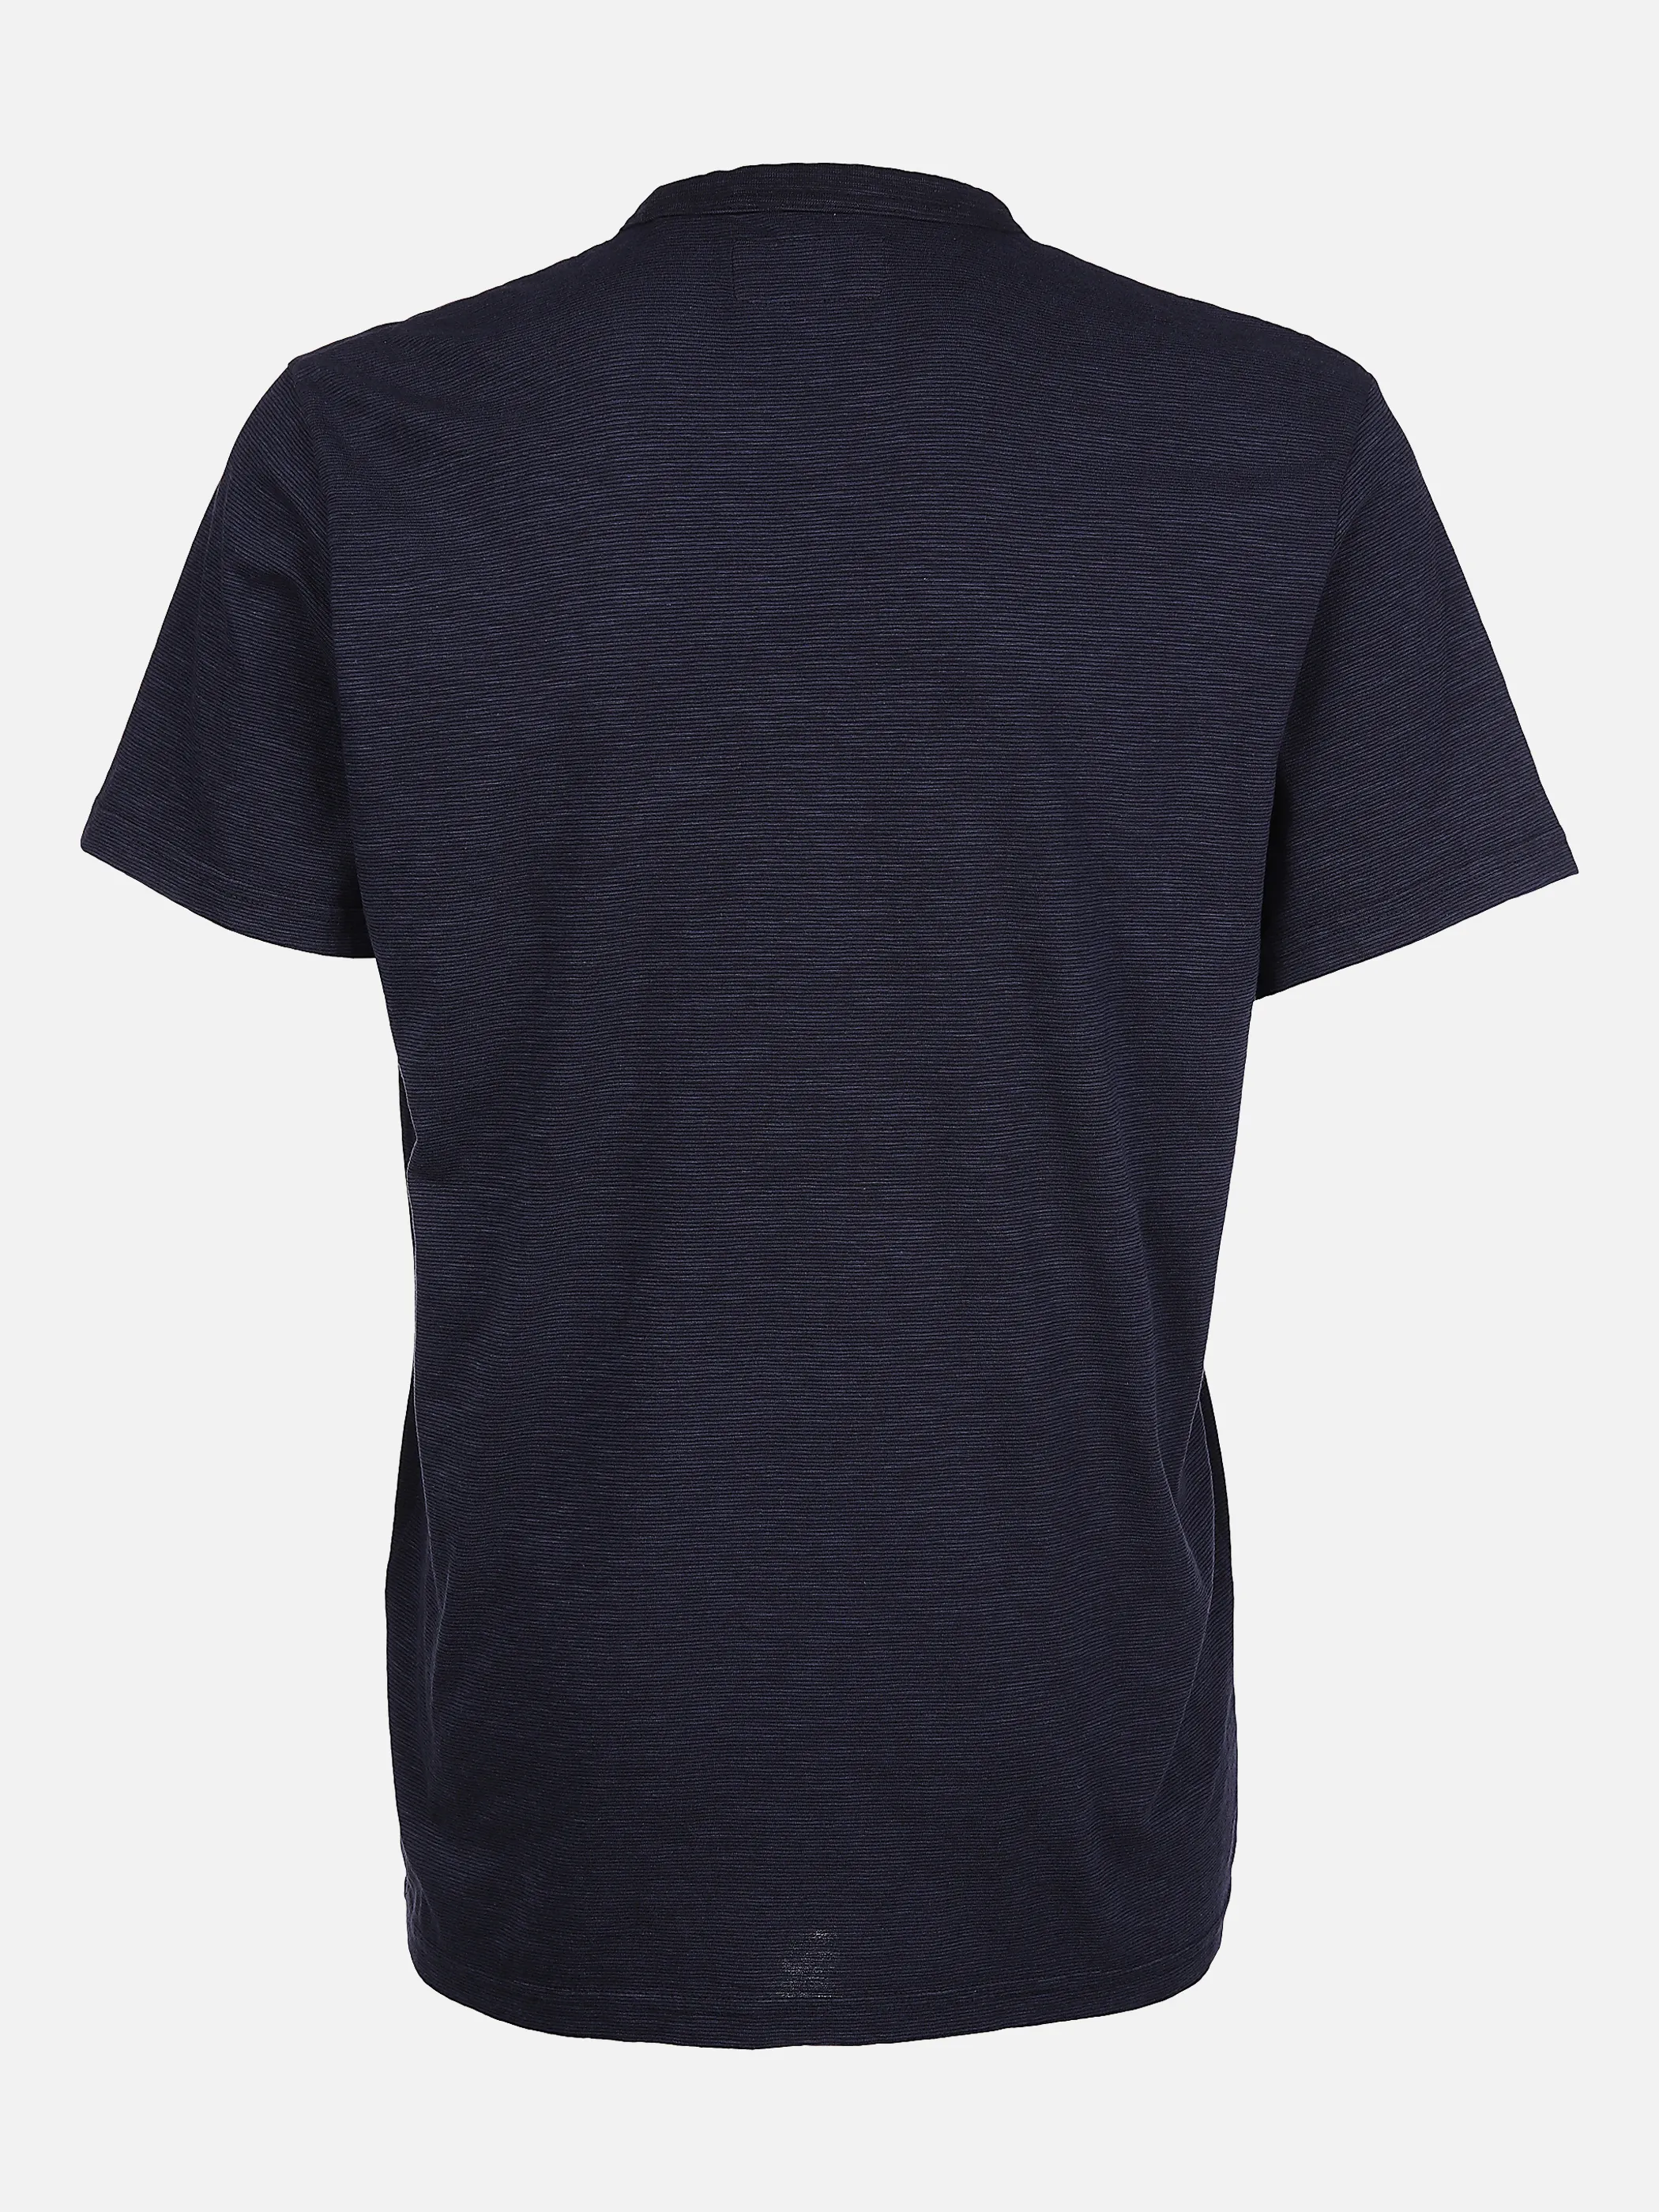 Tom Tailor 1032254 washed t-shirt with pr Blau 865760 10668 2